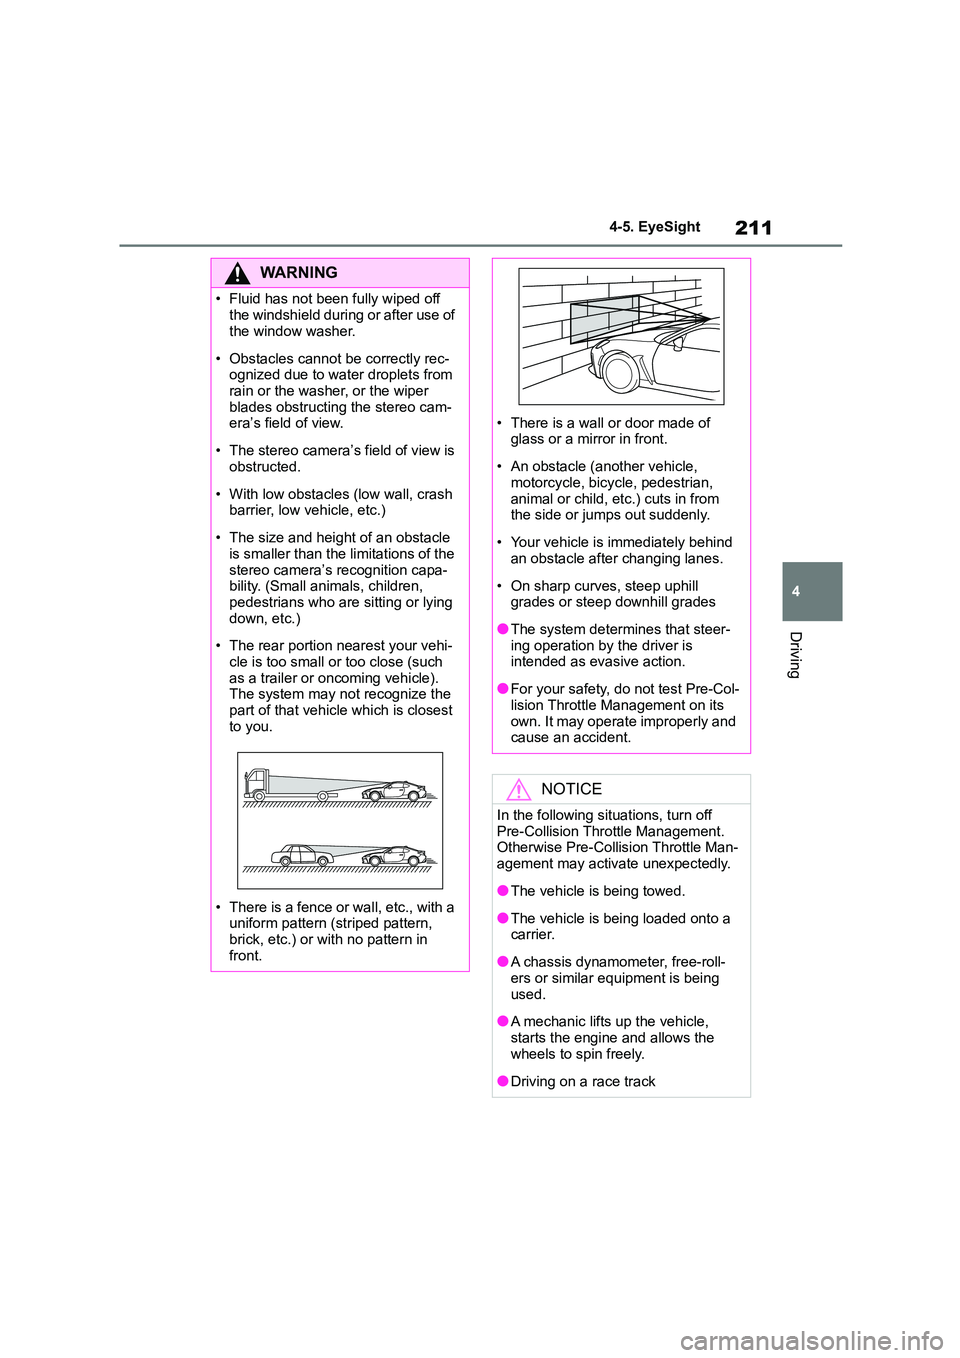 TOYOTA GR86 2022  Owners Manual (in English) 211
4 
4-5. EyeSight
Driving
WA R N I N G
• Fluid has not been fully wiped off  
the windshield during or after use of 
the window washer. 
• Obstacles cannot  be correctly rec- 
ognized due to wa